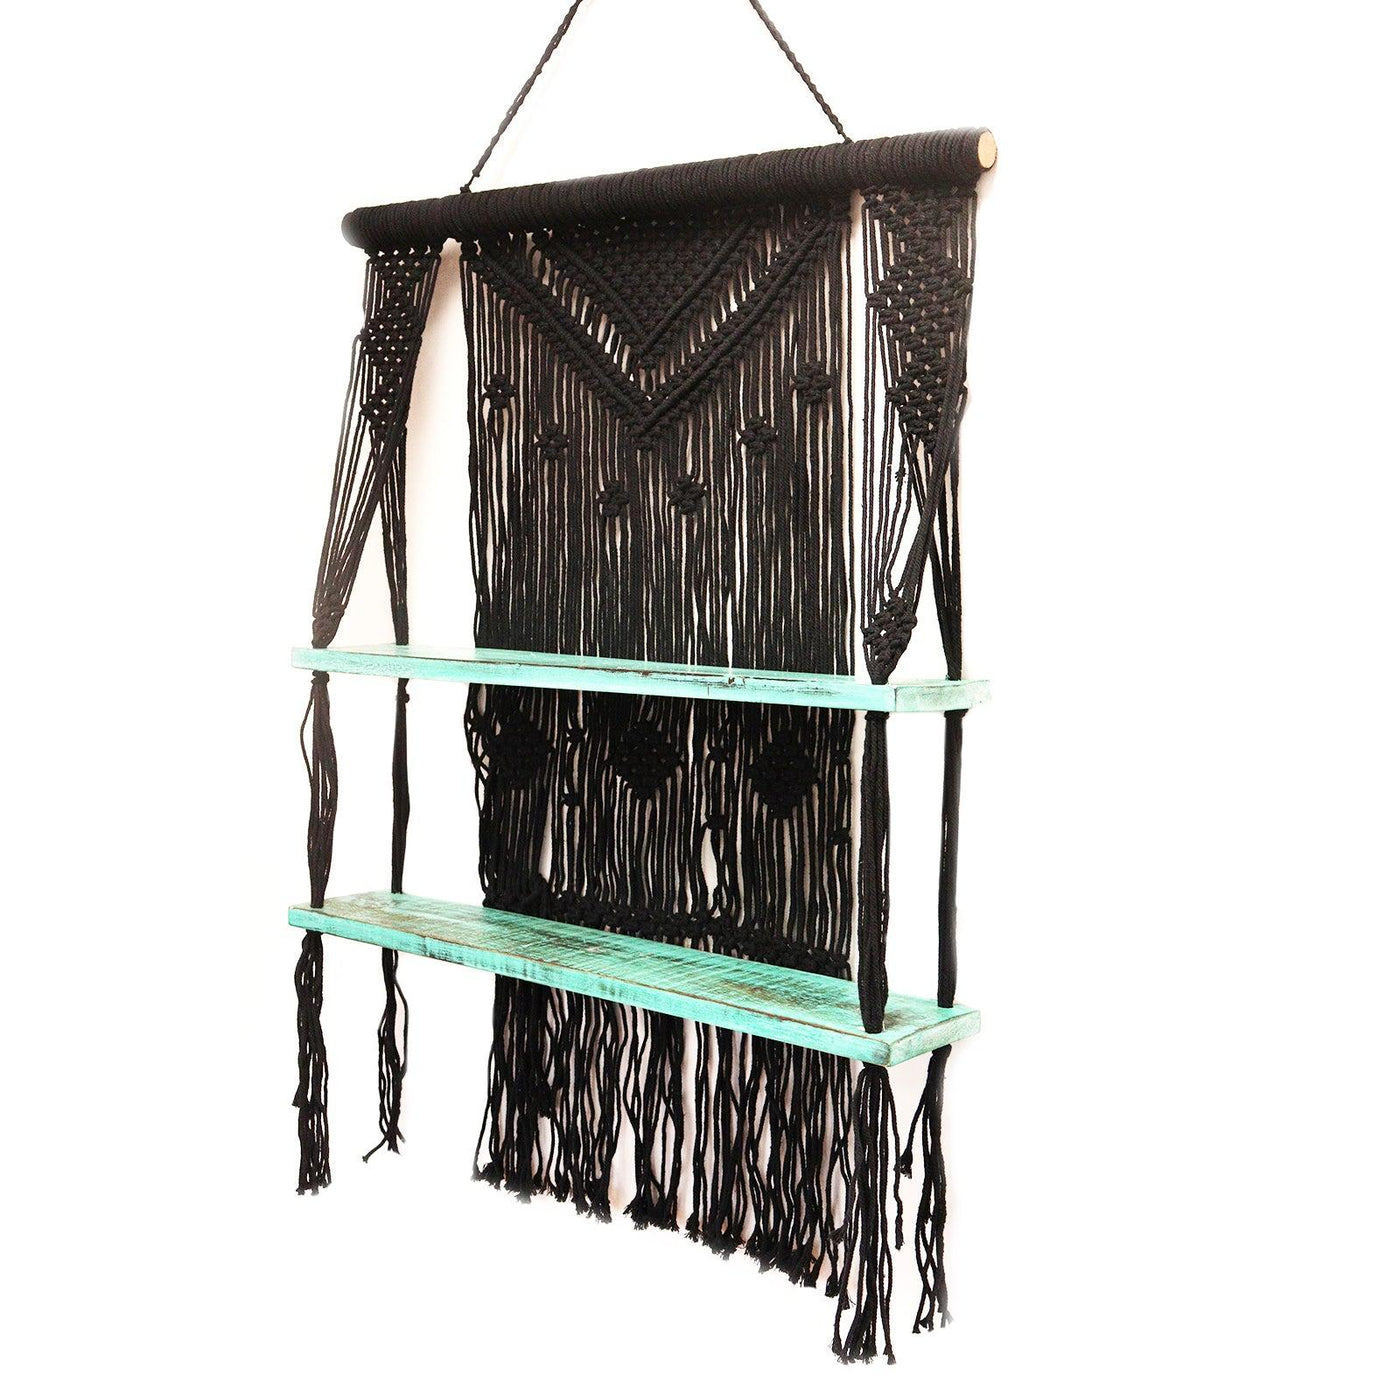 Natural Boho Macrame 2 Tier Wooden Hanging Wall Shelves - Turquoise 